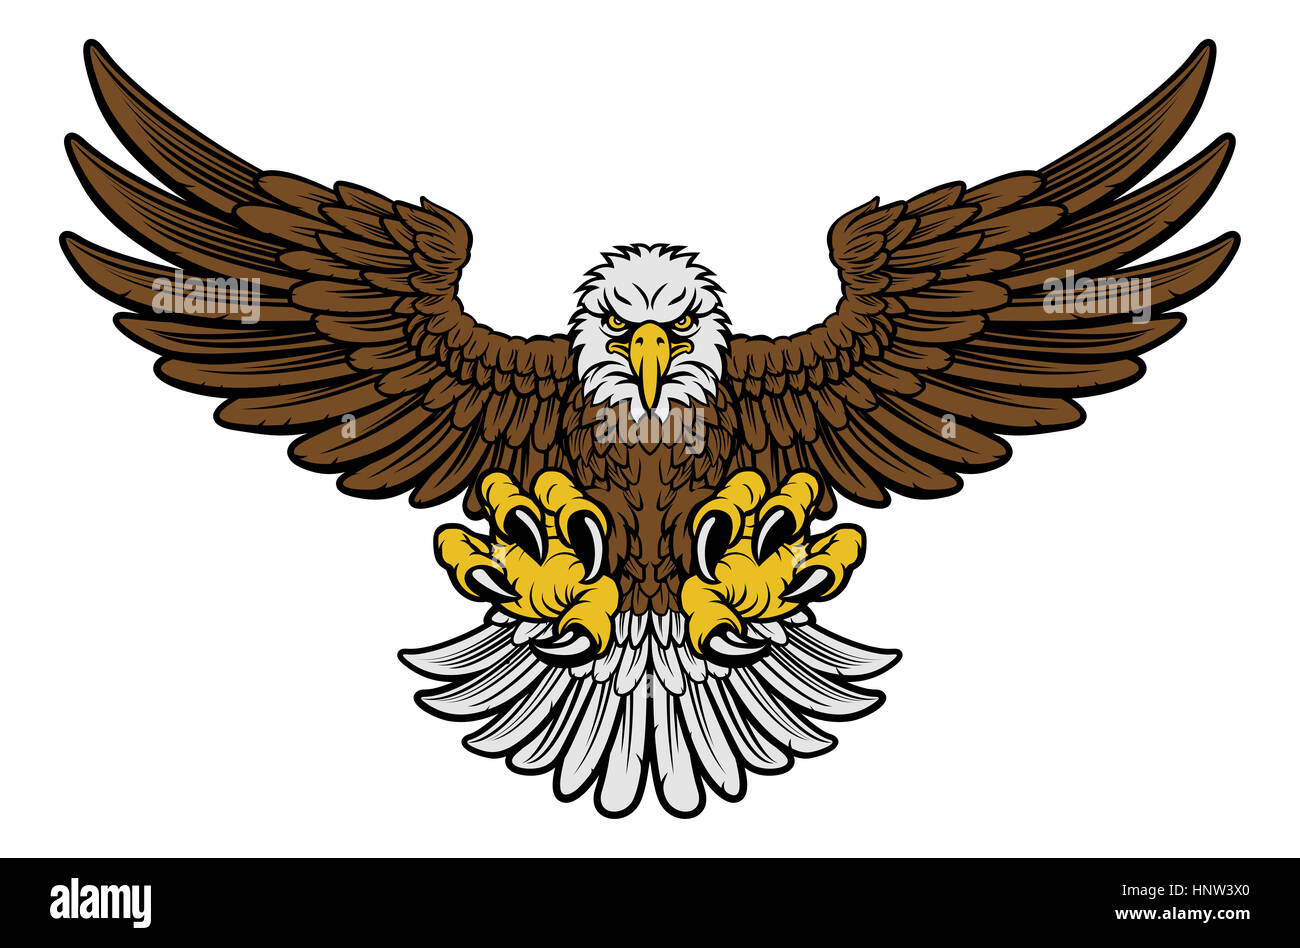 Cartoon bald American eagle mascot swooping with claws out and wings outstretched. Four color version with only brown, lightgrey, yellow and black Stock Photo